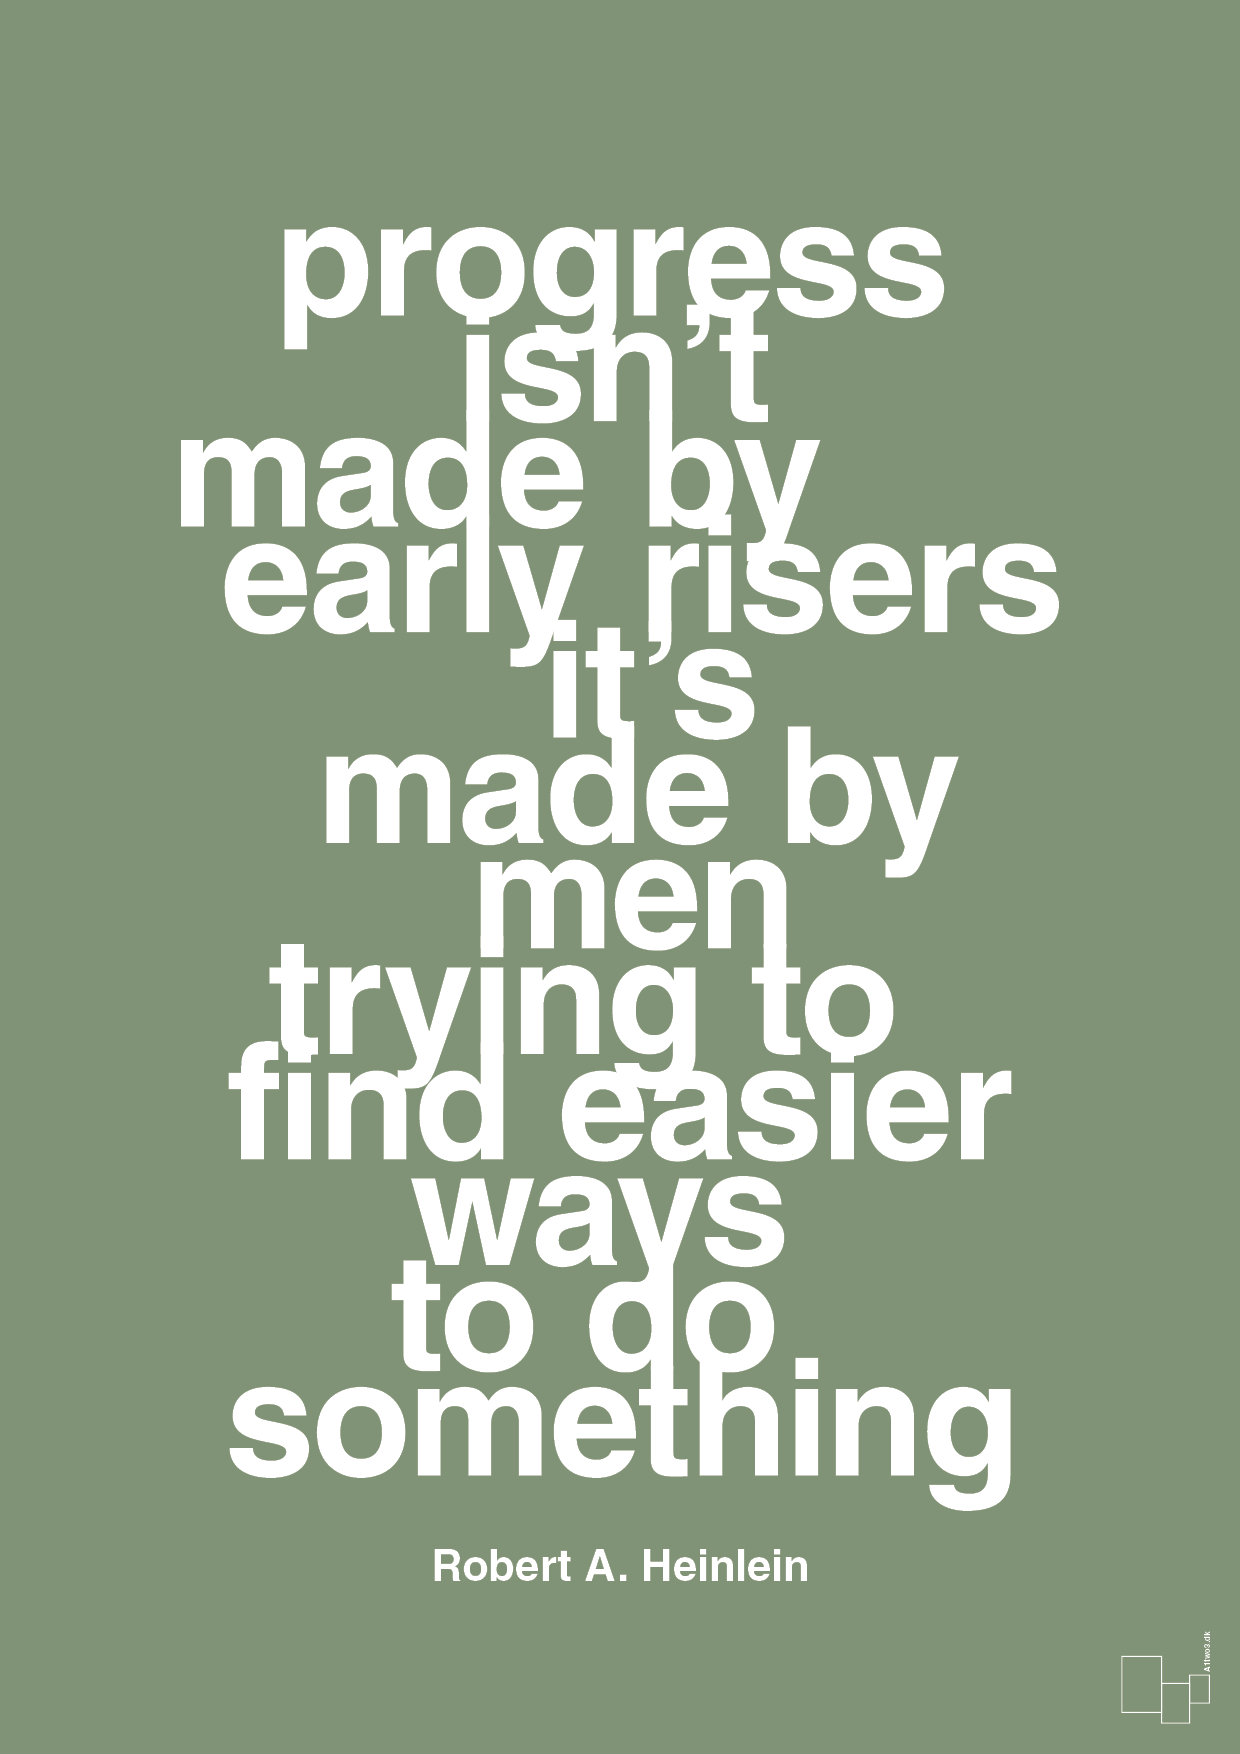 progress isnt made by early risers - Plakat med Citater i Jade